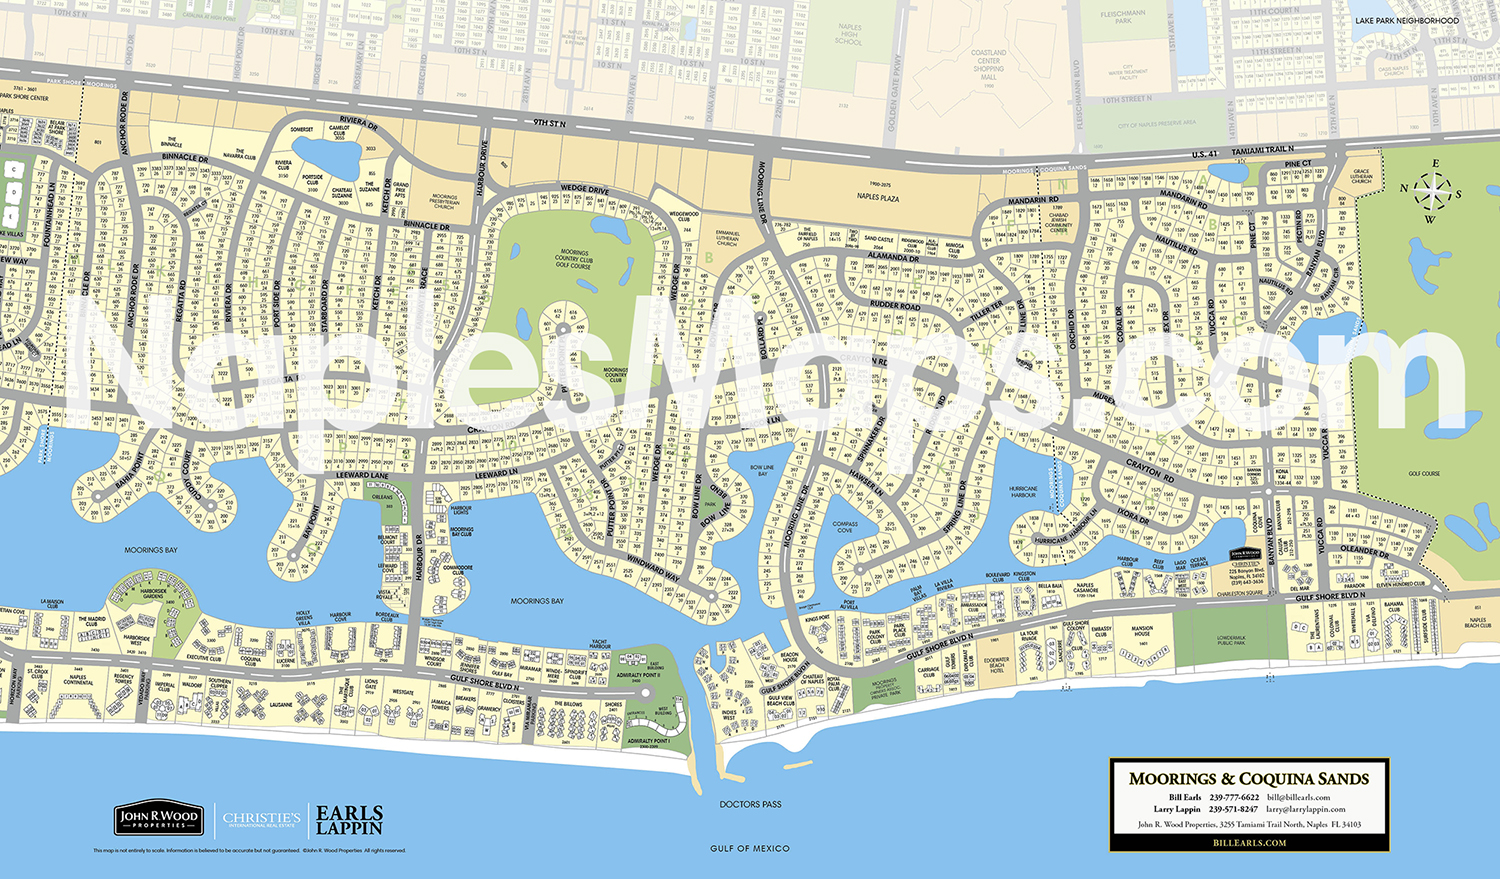 Moorings Map and Coquina Sands Map